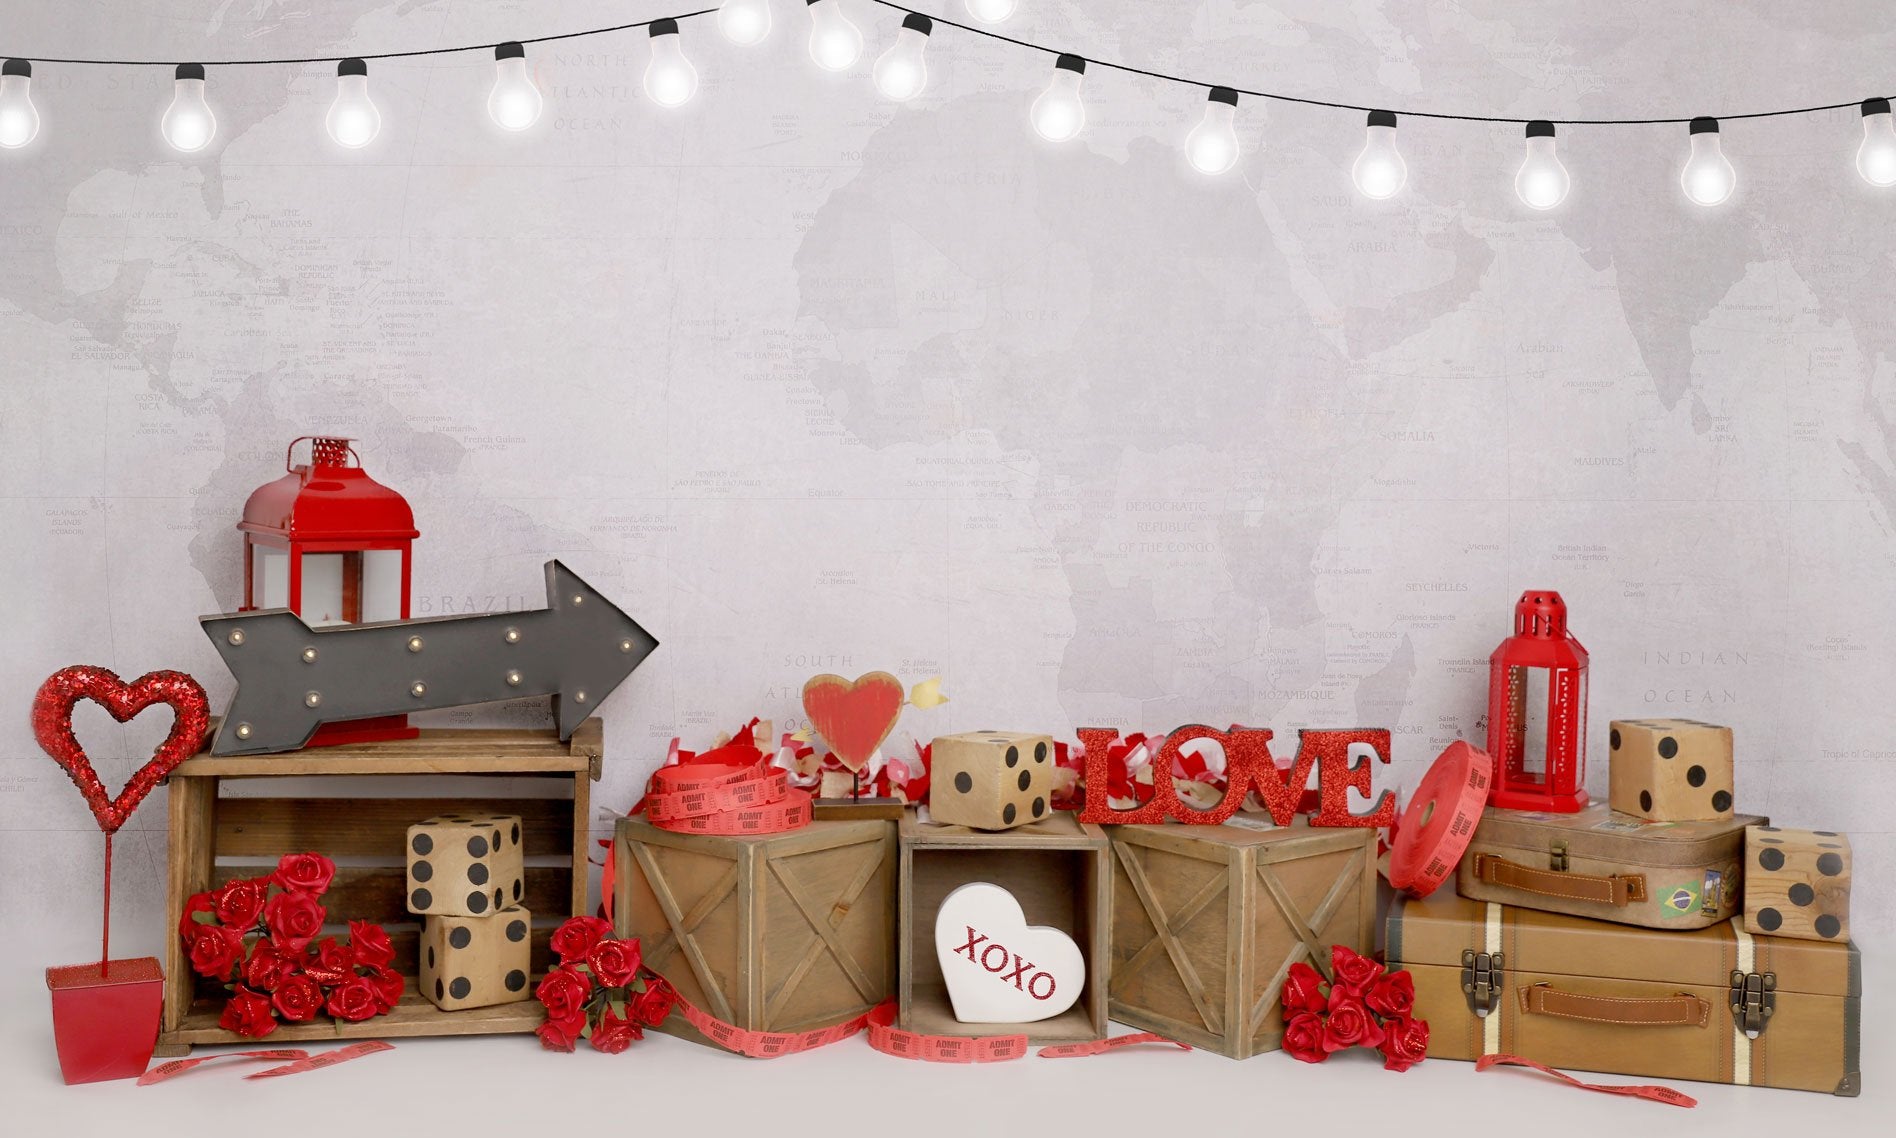 Kate Valentine‘s Day Love Lights White Wall Backdrop Designed by Melissa King